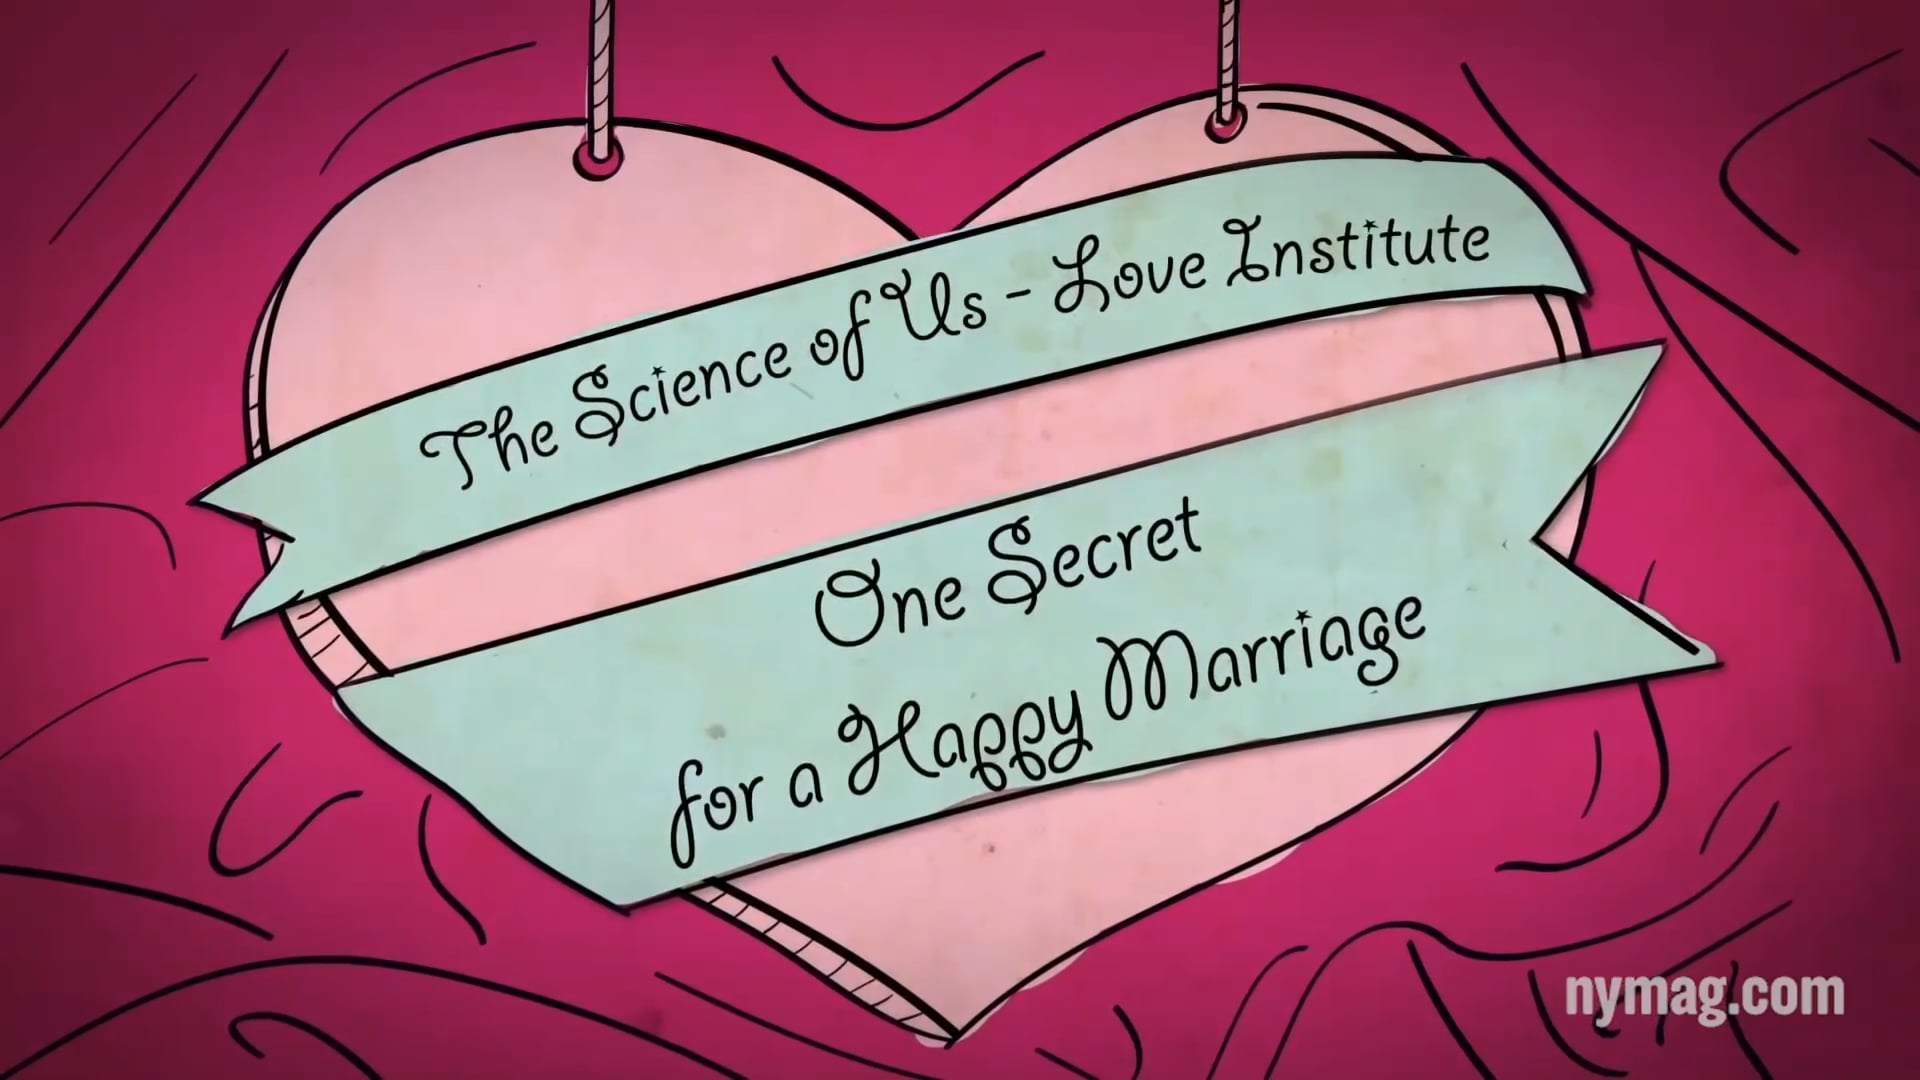 1 Secret for a Happy Marriage - The Science of Us 